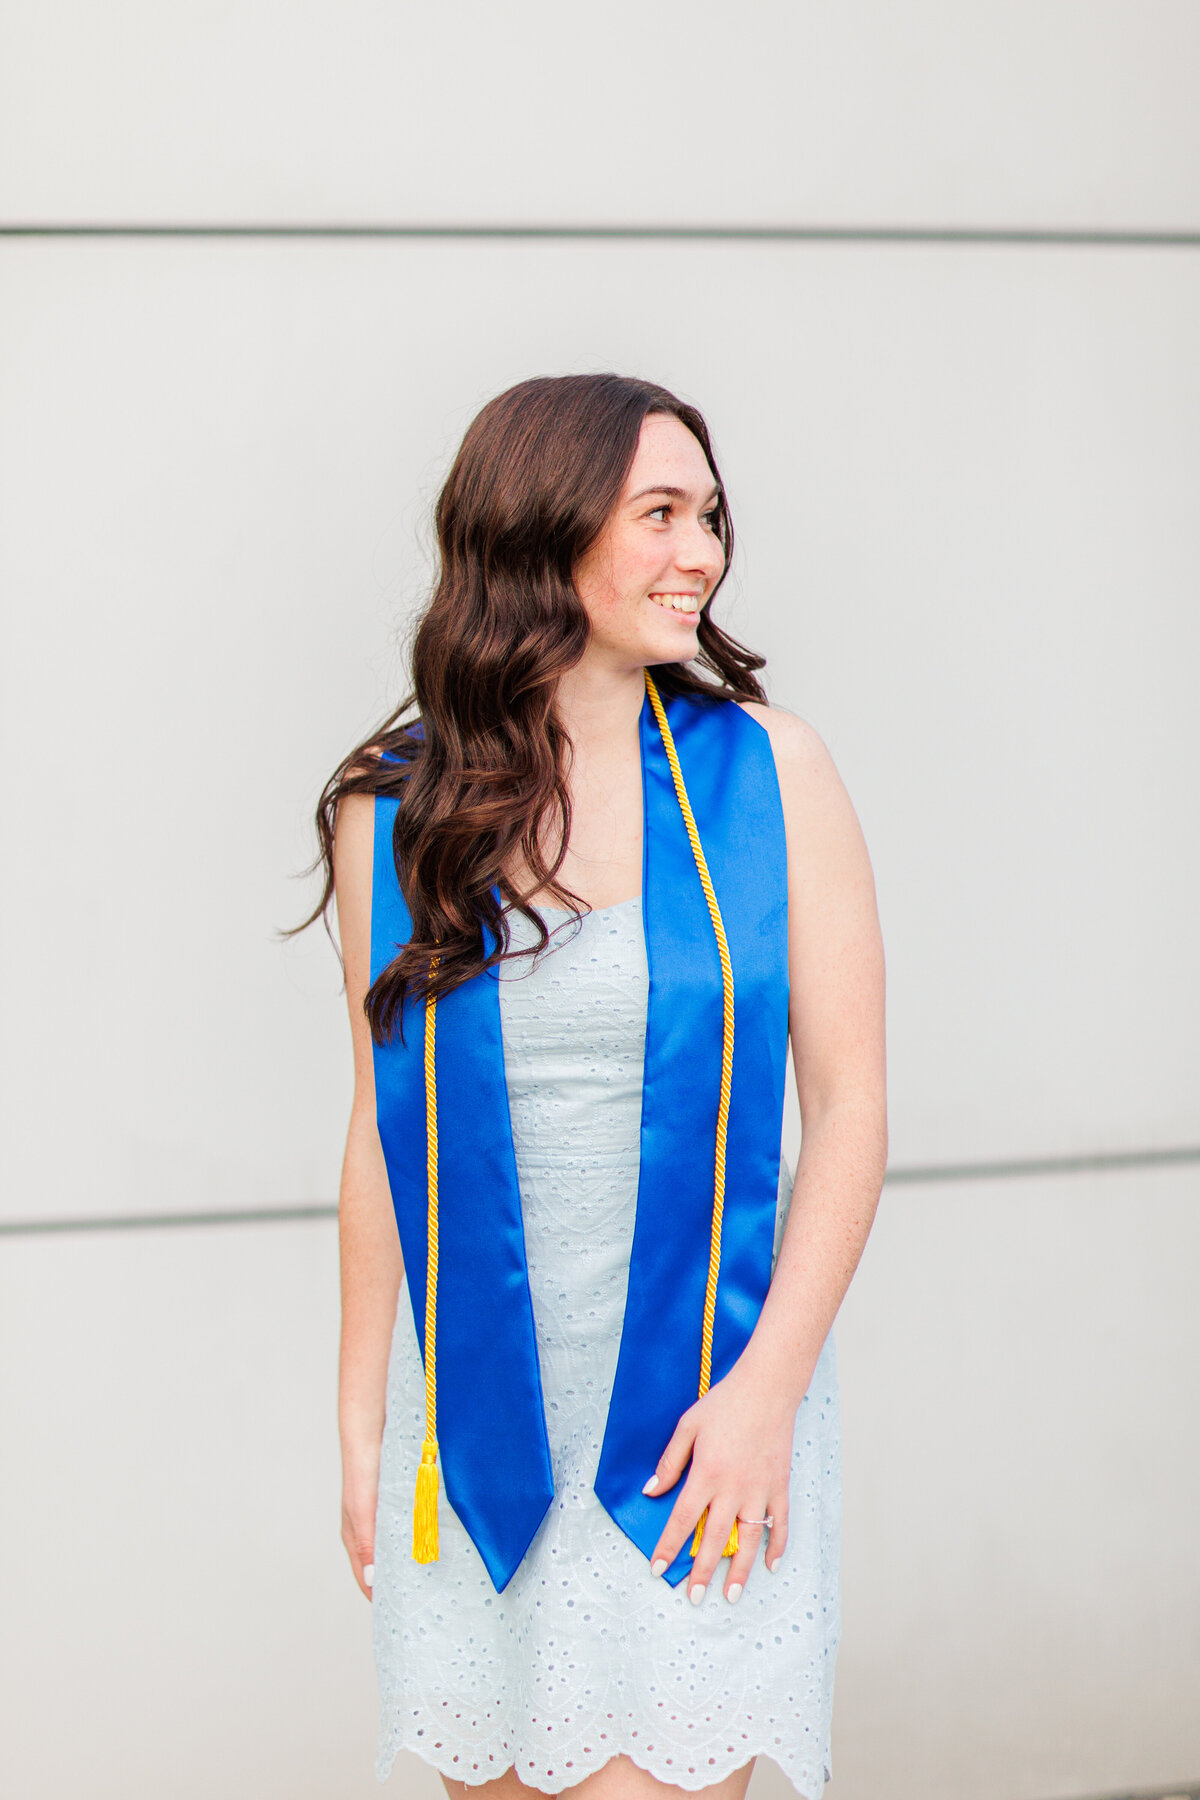 A girl wearing her graduation cords and smiling off camera representing Boston graduation pictures